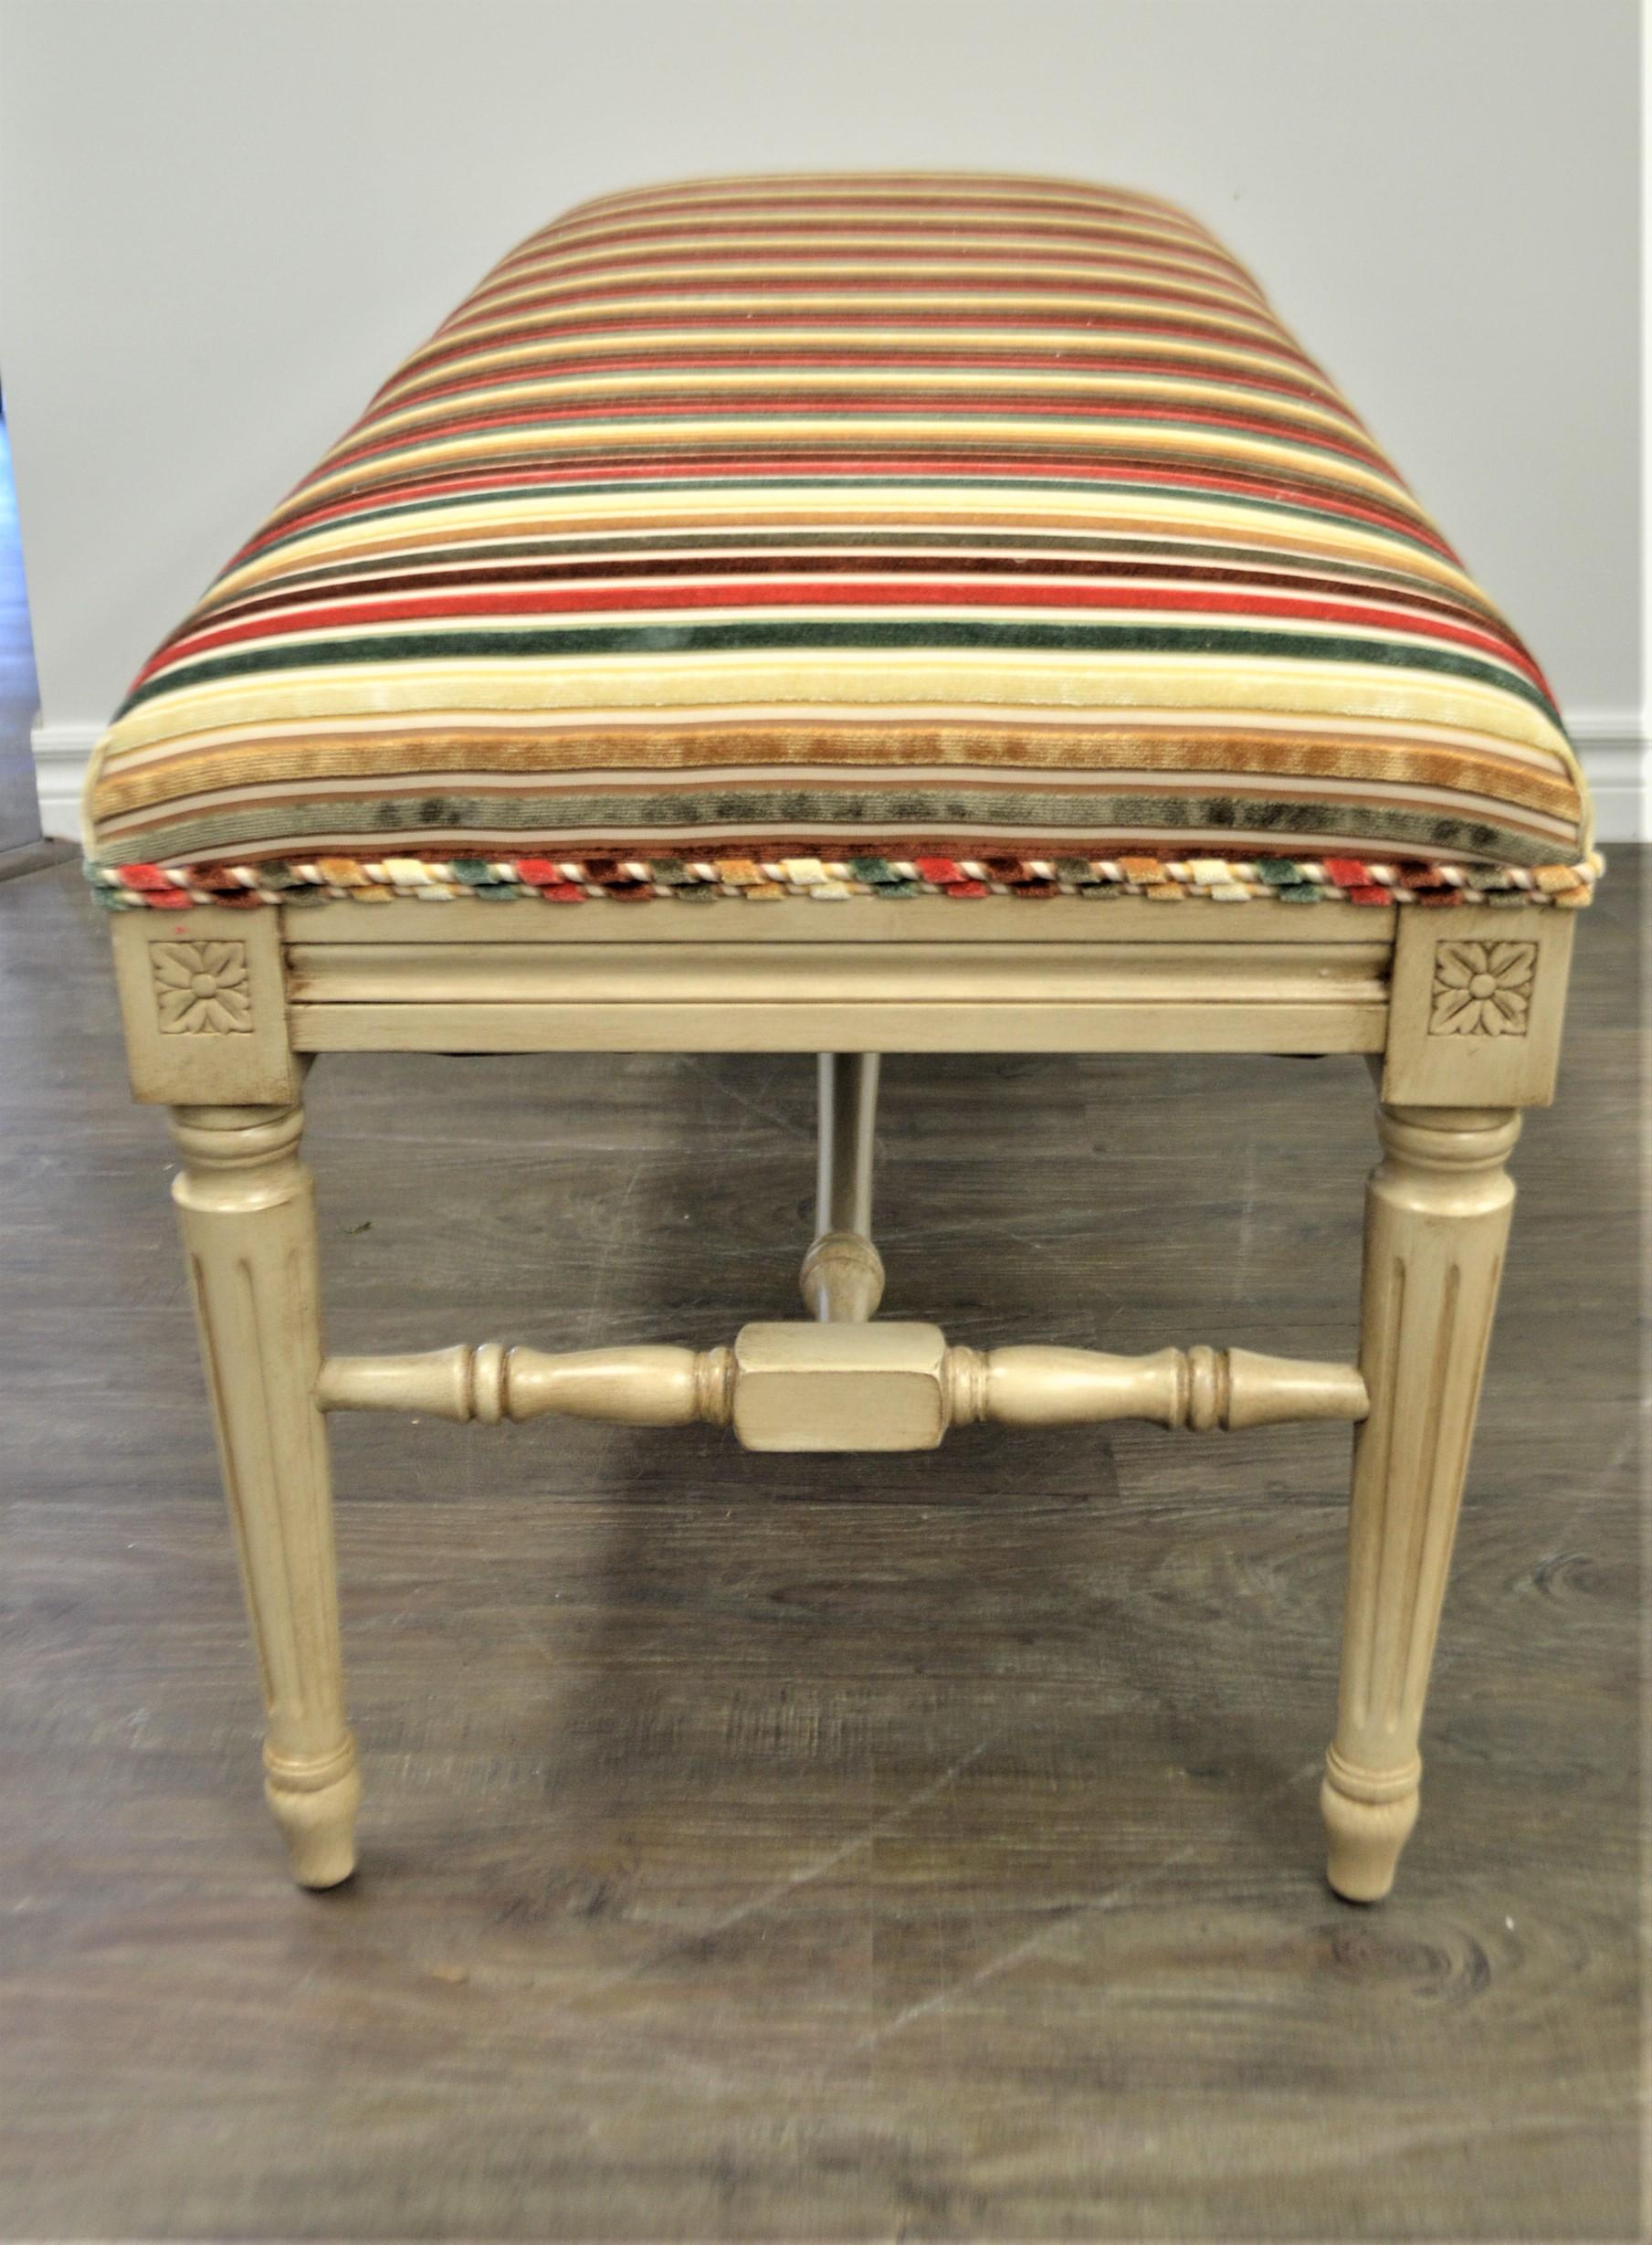 Wooden bench, made in Italy of beechwood, it has Louis XVI style legs and cross bar, it has been painted in a light gold tone to match the colors in the cut velvet fabric.
This bench is available for custom on choice of wood finish, painted or wood